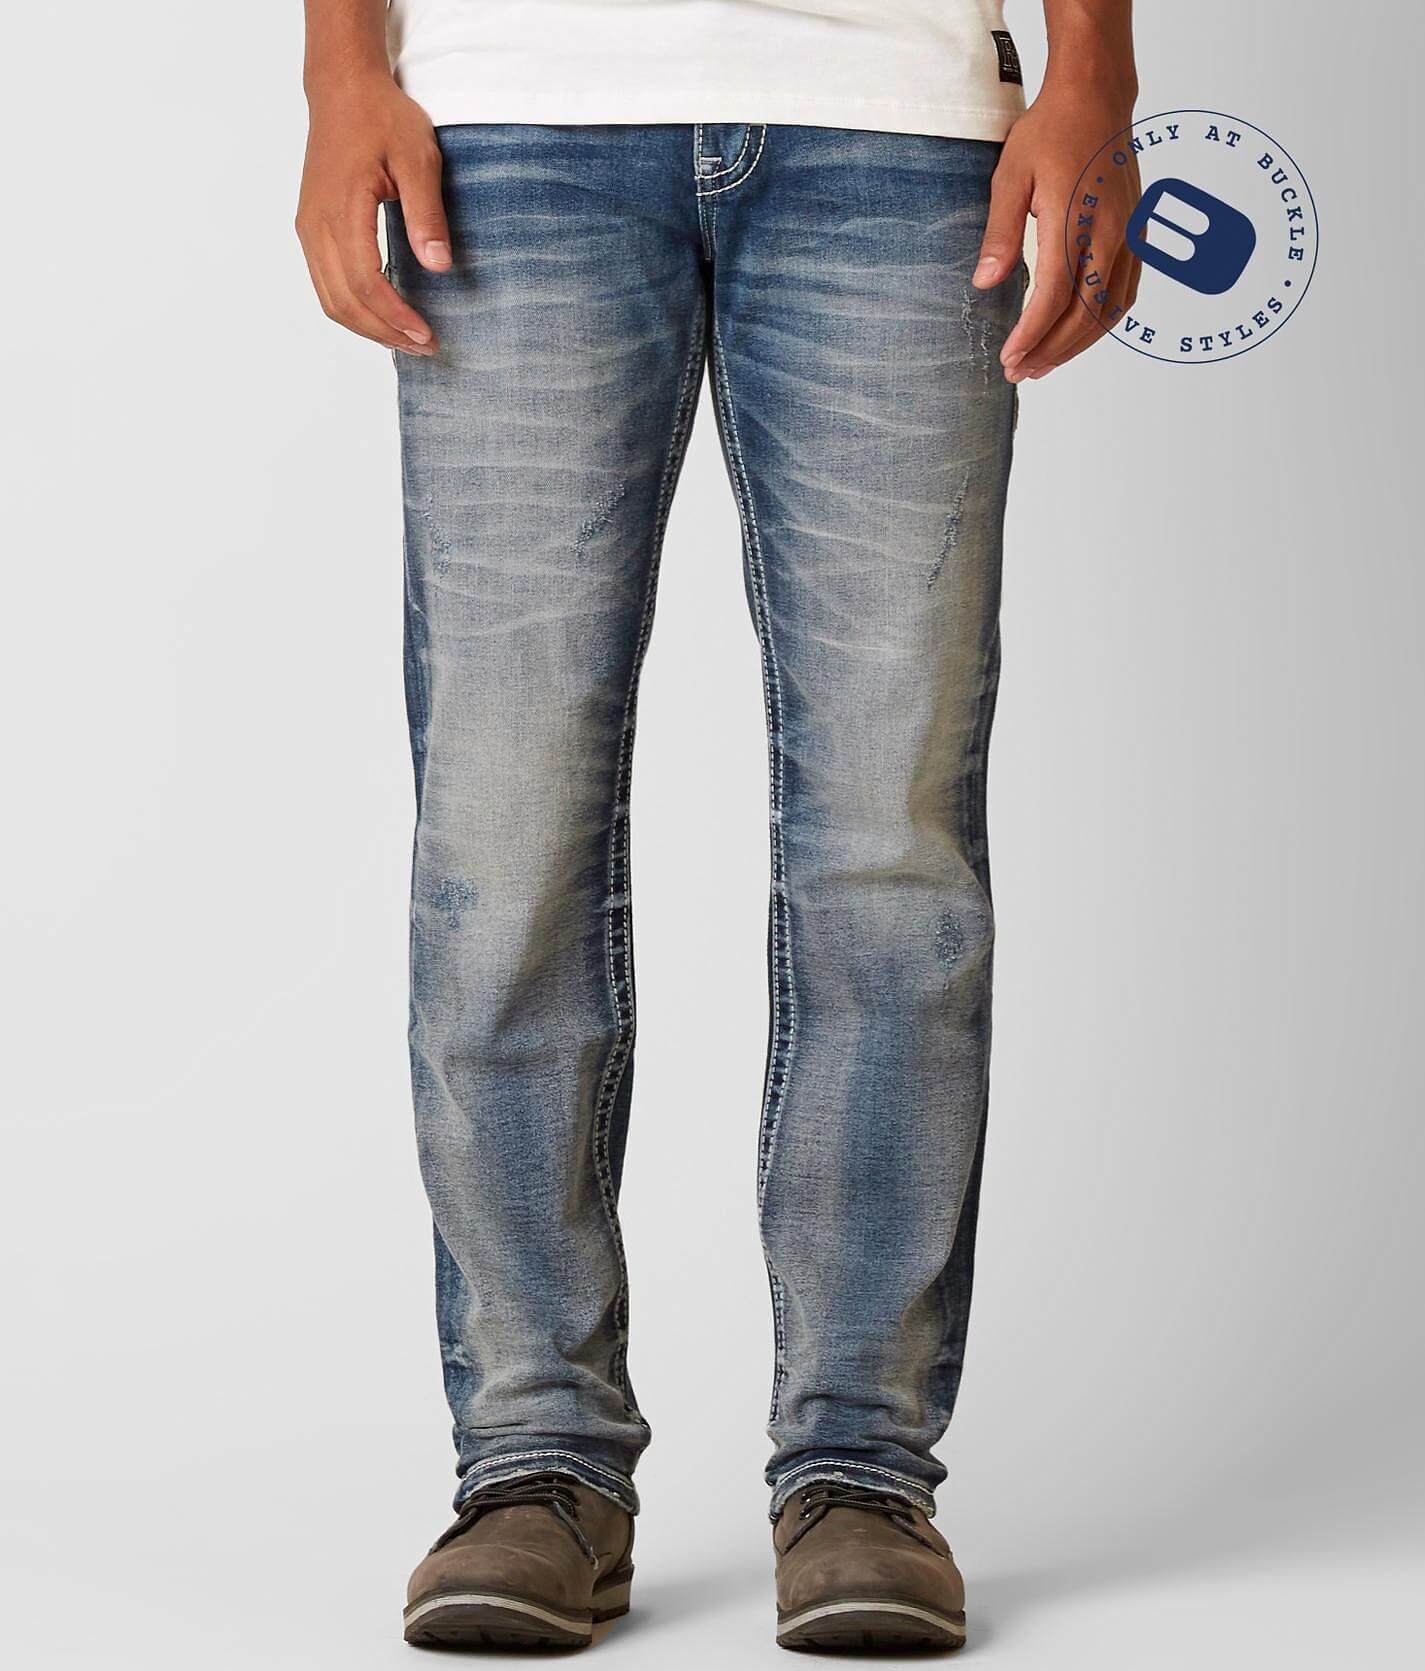 cantabil jeans online